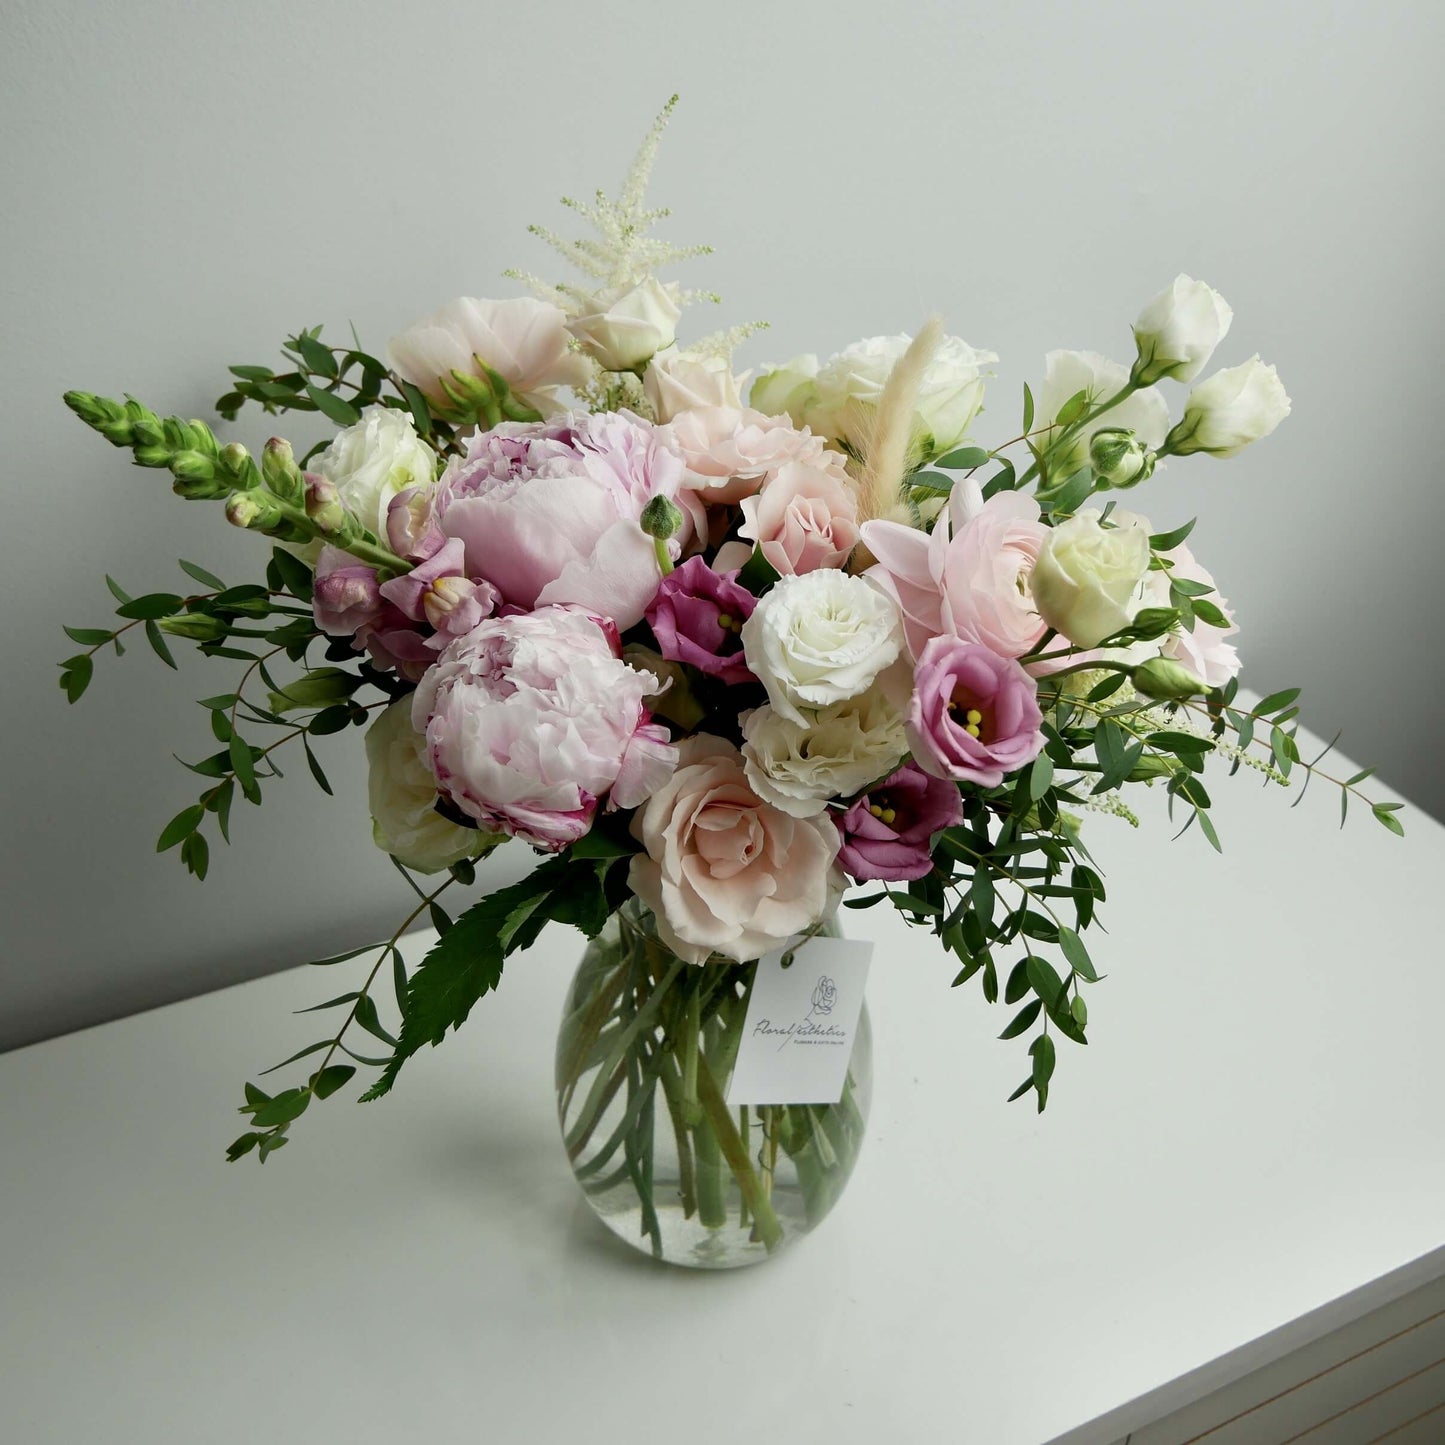 Tender pink and white standard size flower arrangement in clear vase featuring peonies, ranunculus, roses, greens and more